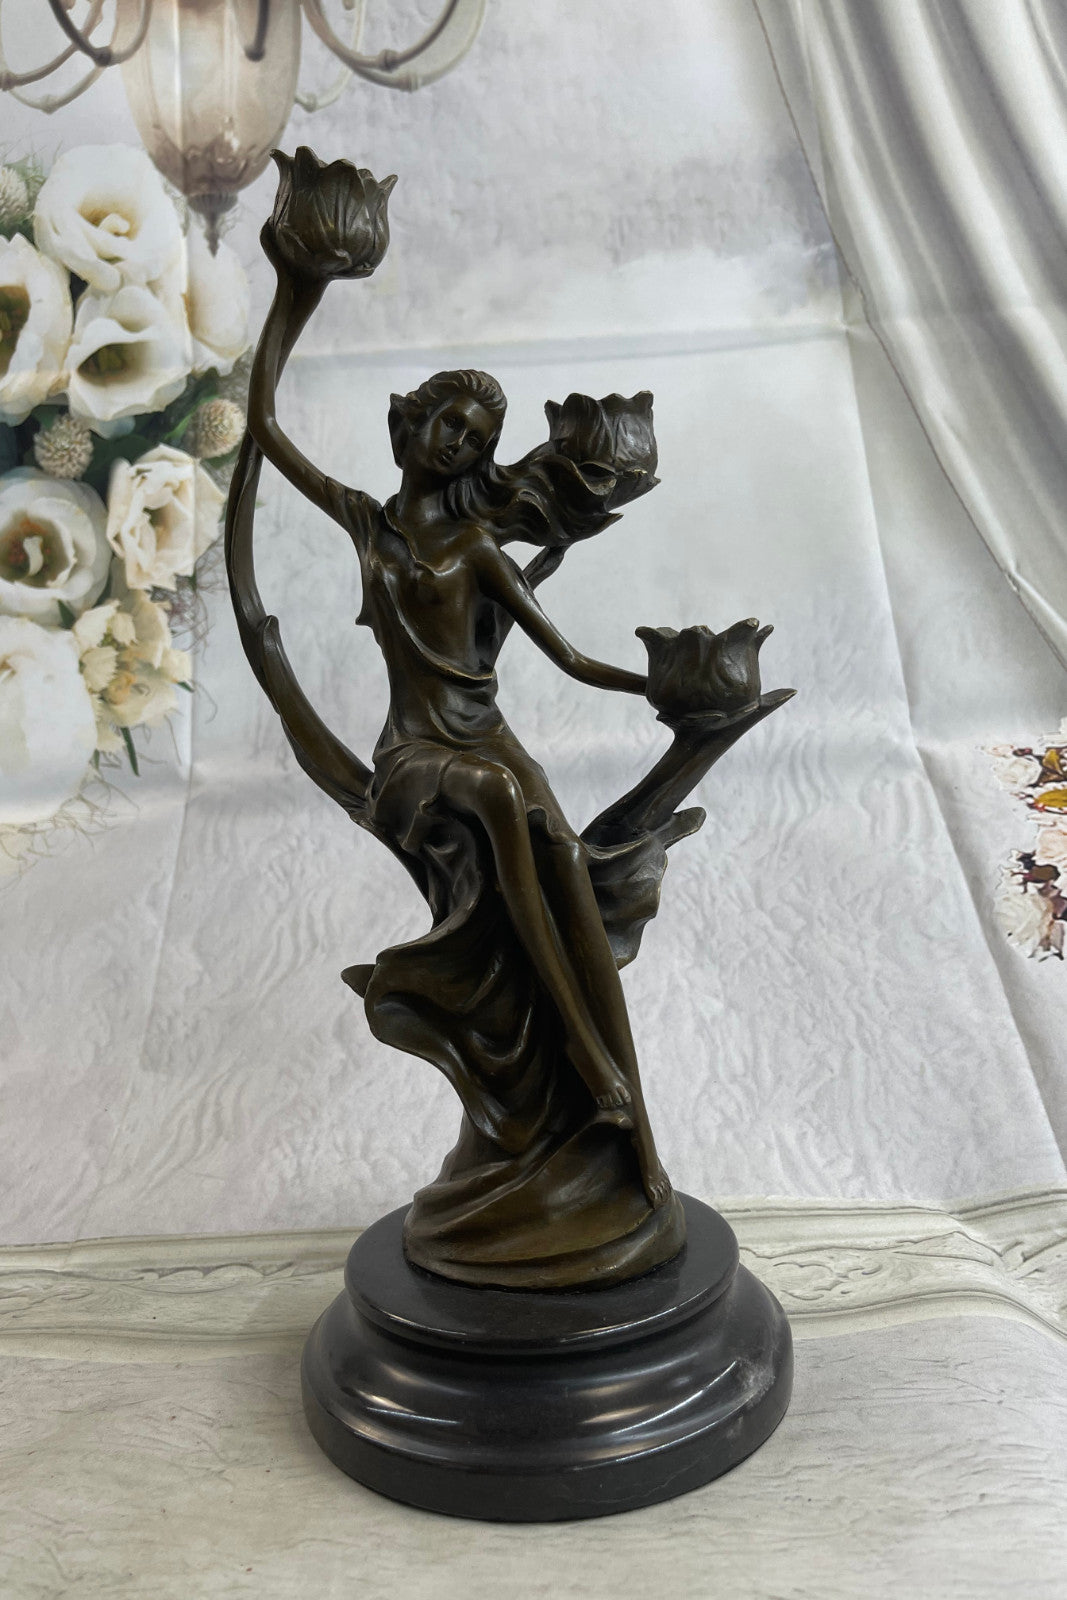 Hot Cast Hand Made Candle Holder Sexy Nymph with Flowers Bronze Statute Deal